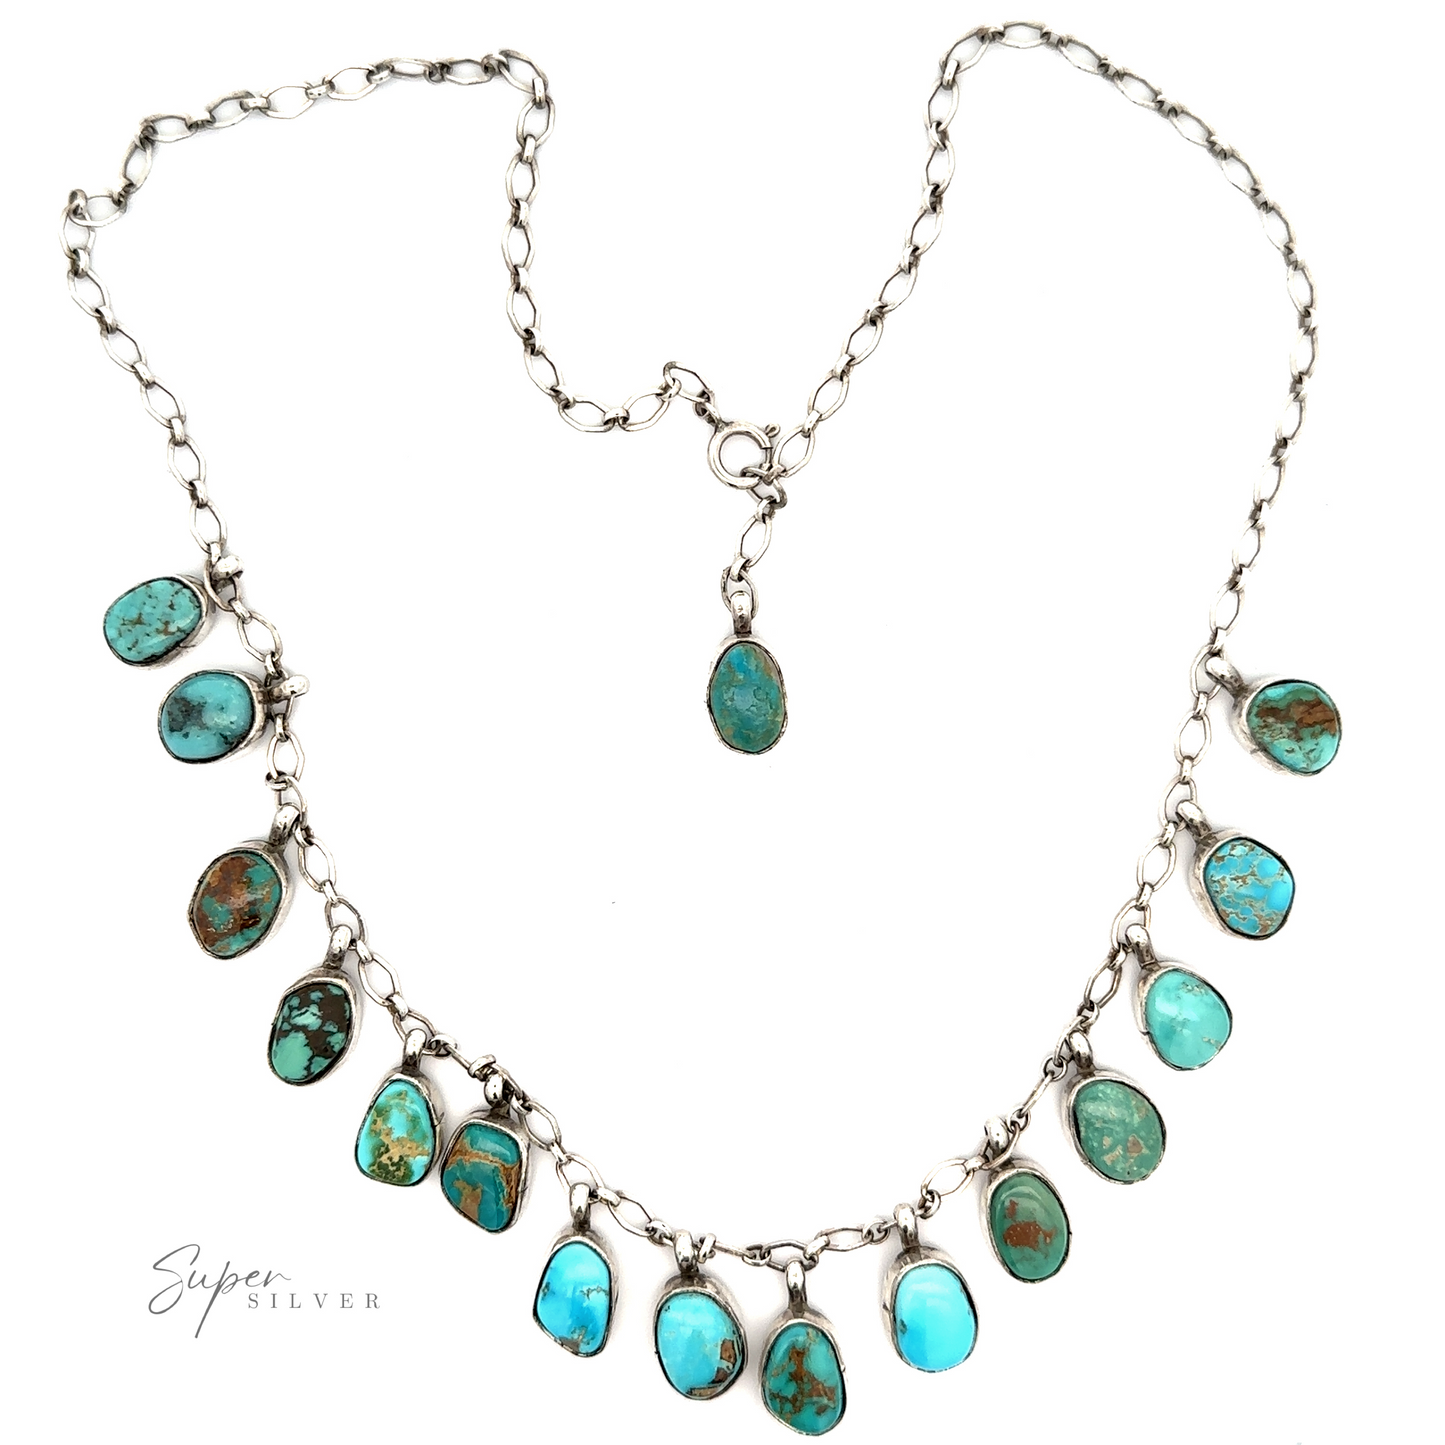 Handcrafted Charm Turquoise Necklace with multiple turquoise stones set in teardrop shapes, displayed on a white background.